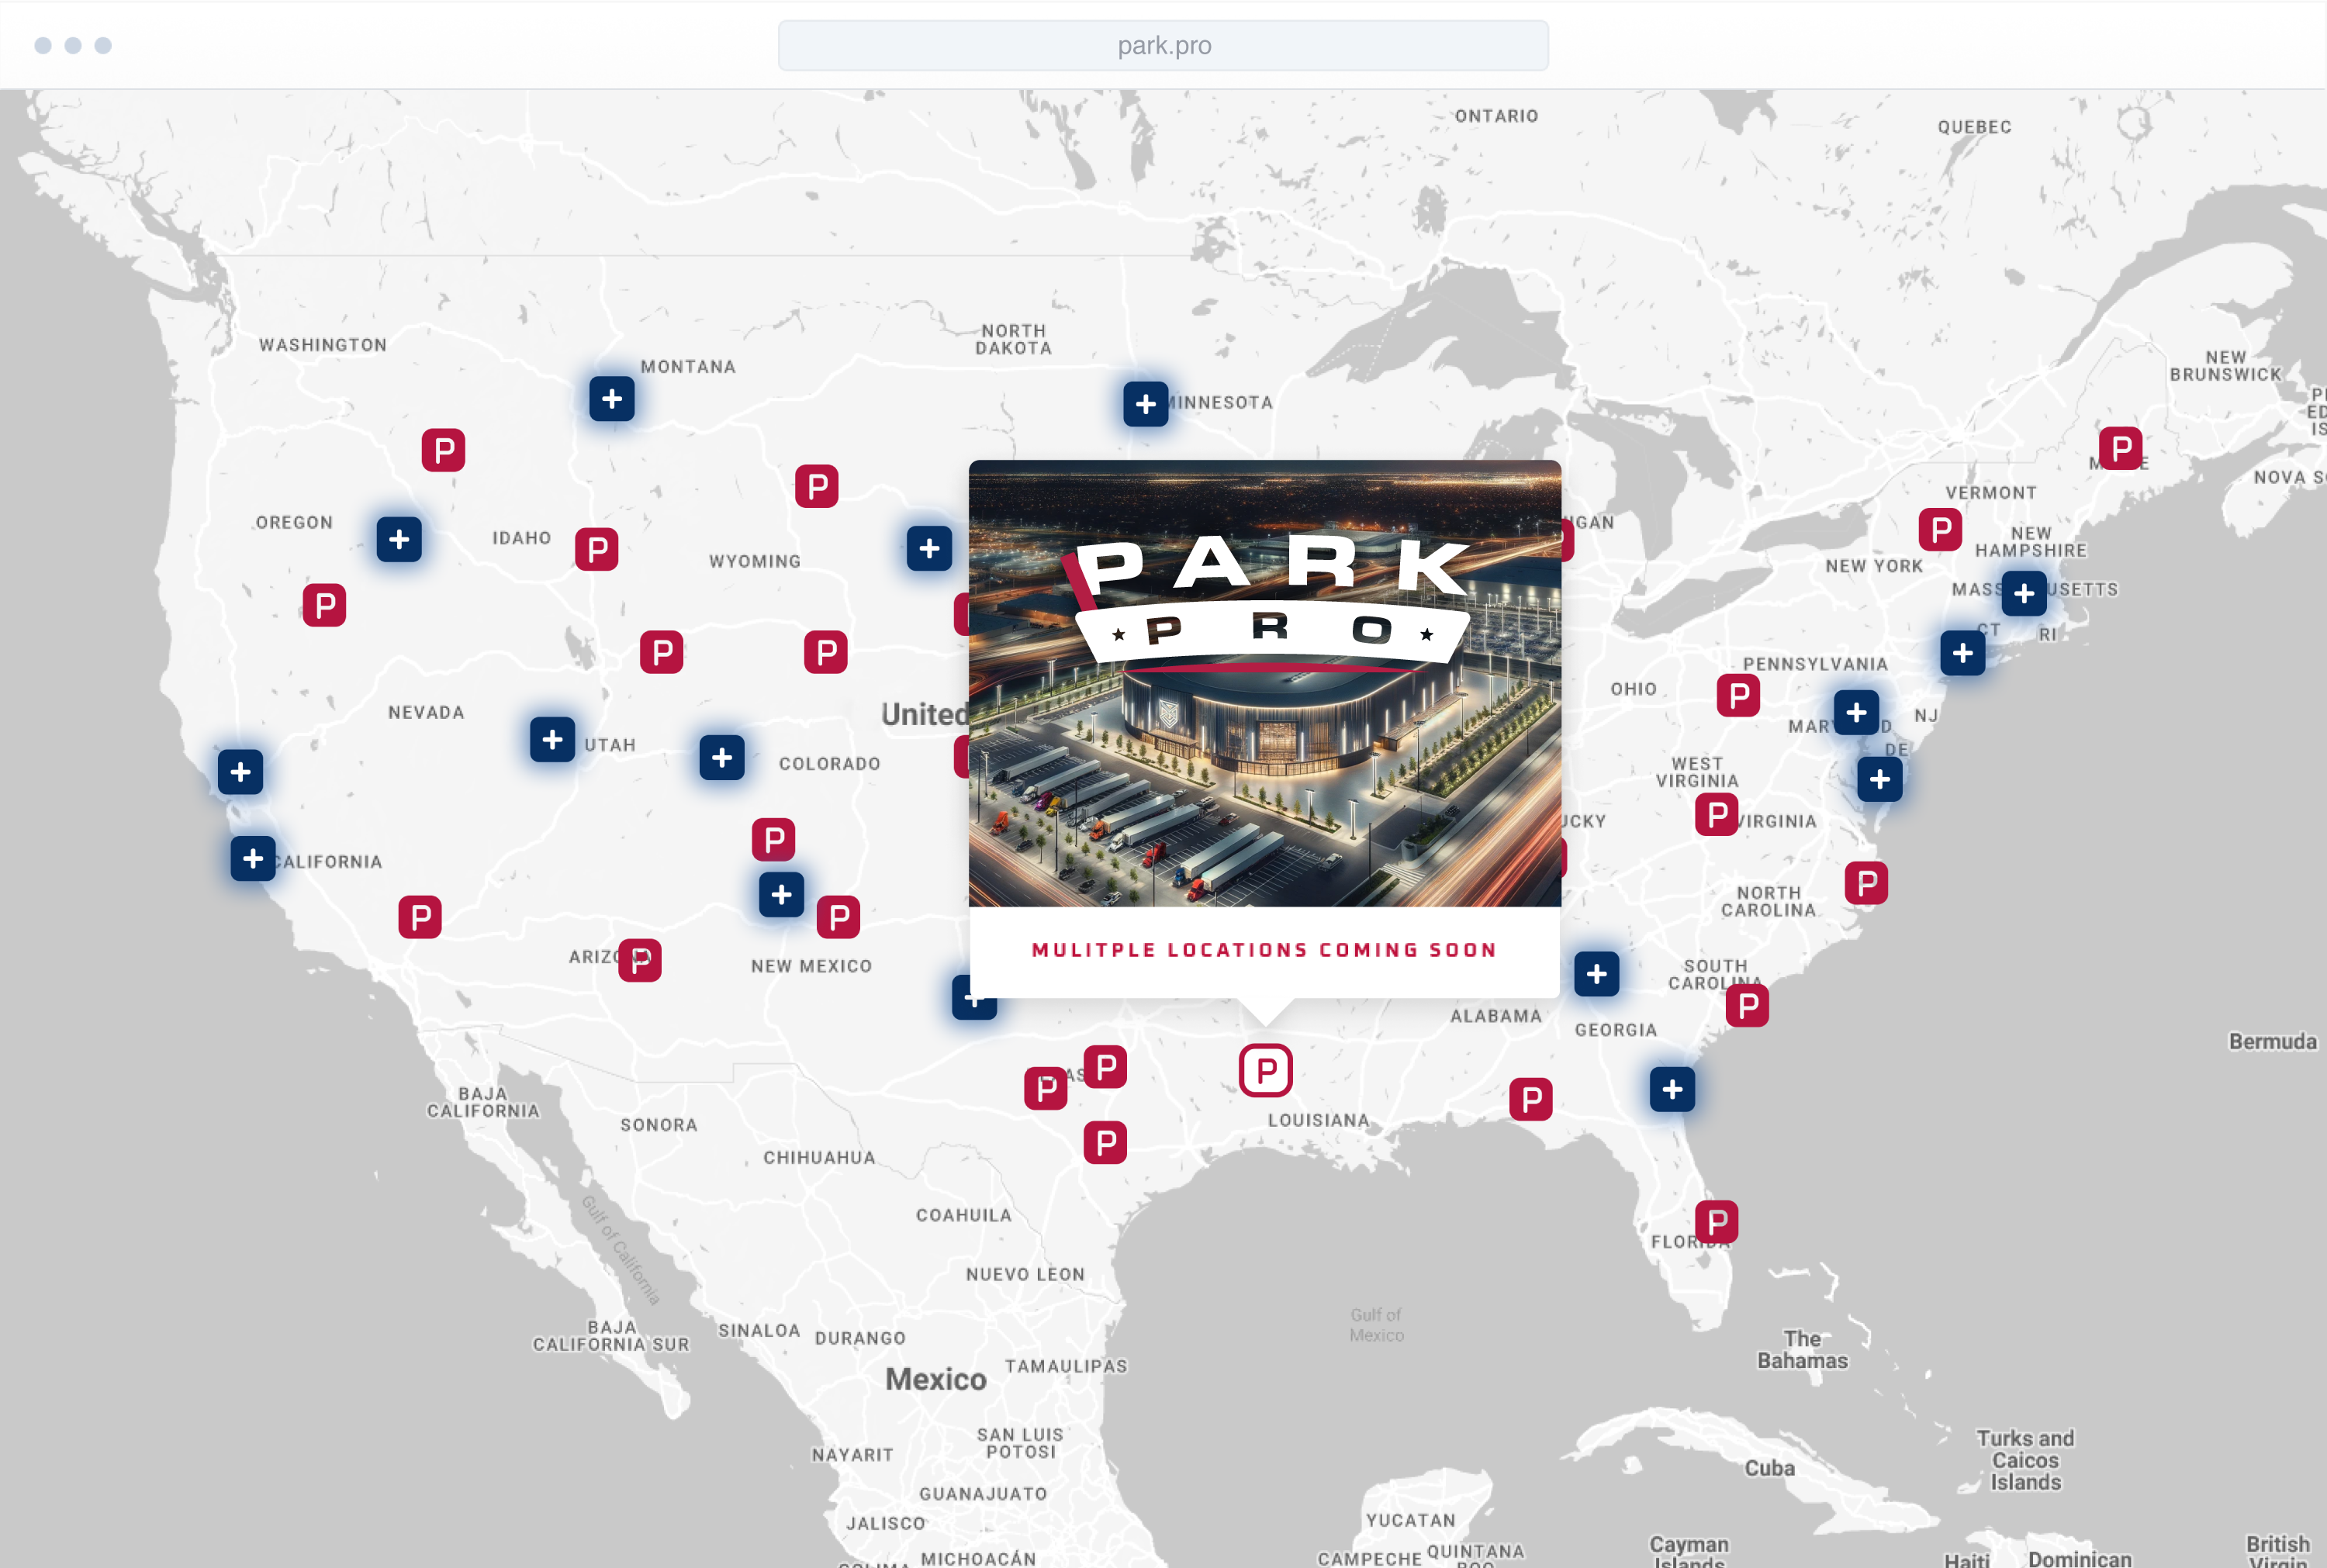 Park Pro Map with Parking location drop-pins throughout the USA - Pin Location Shown in Card